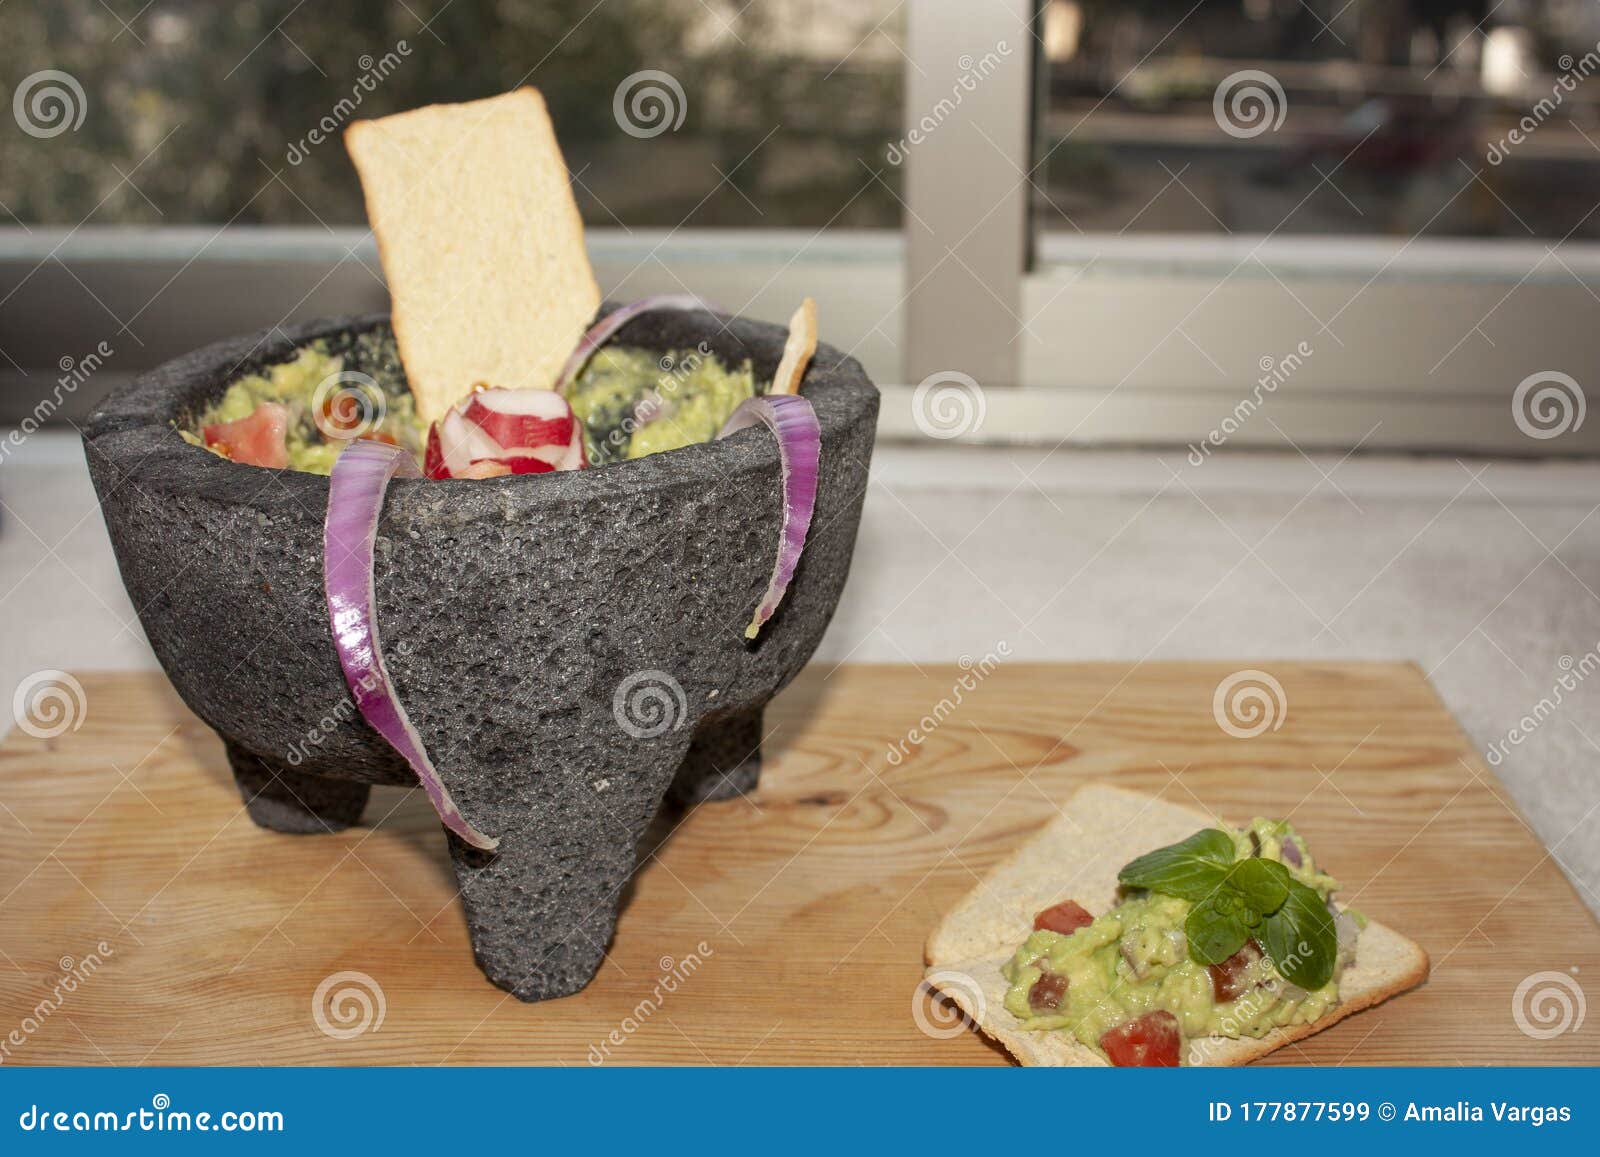 Crispy Corn Toast Served With Typical Mexican Food Spatter Cooked With Shredded Beef Red Chili Lettuce And Guacamole Stock Image Image Of Crunchy Hispanic 177877599